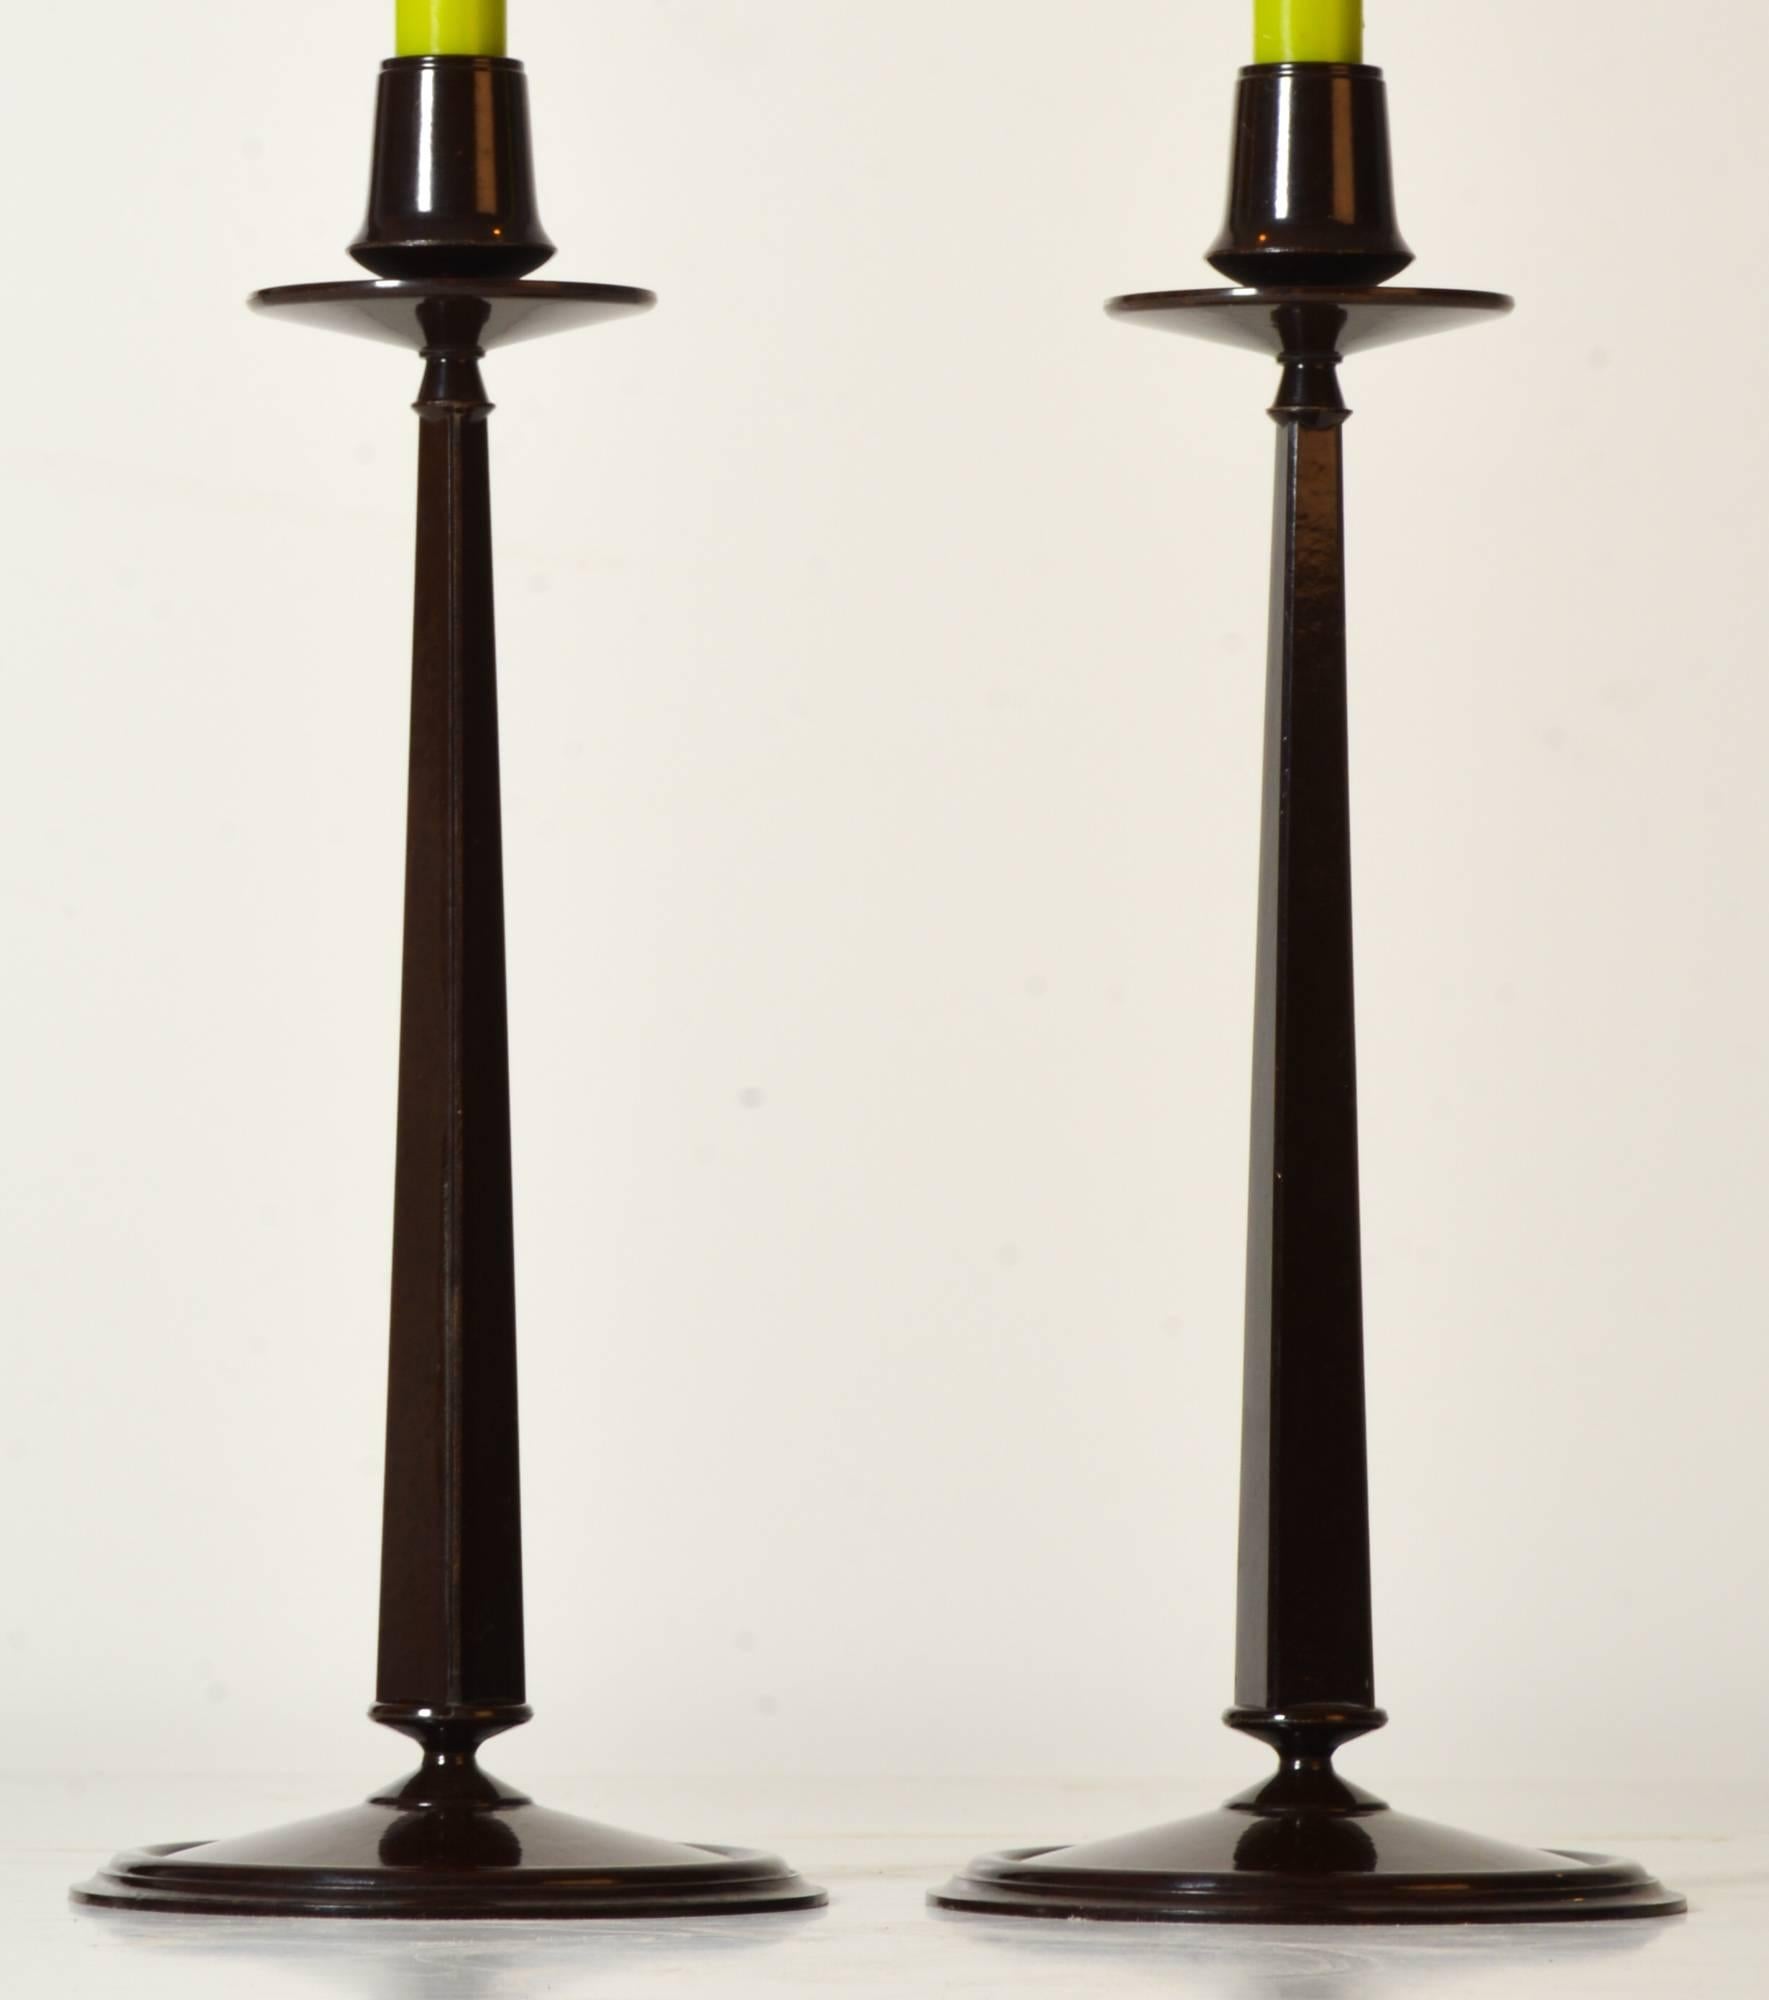 A fine pair of Jugendstil tall tapered elegant backelite candlesticks, designed by Charles Rennie Mackintosh and manufactured by Linsden Ware. Excellent quality each section with screw fitting. More items available.